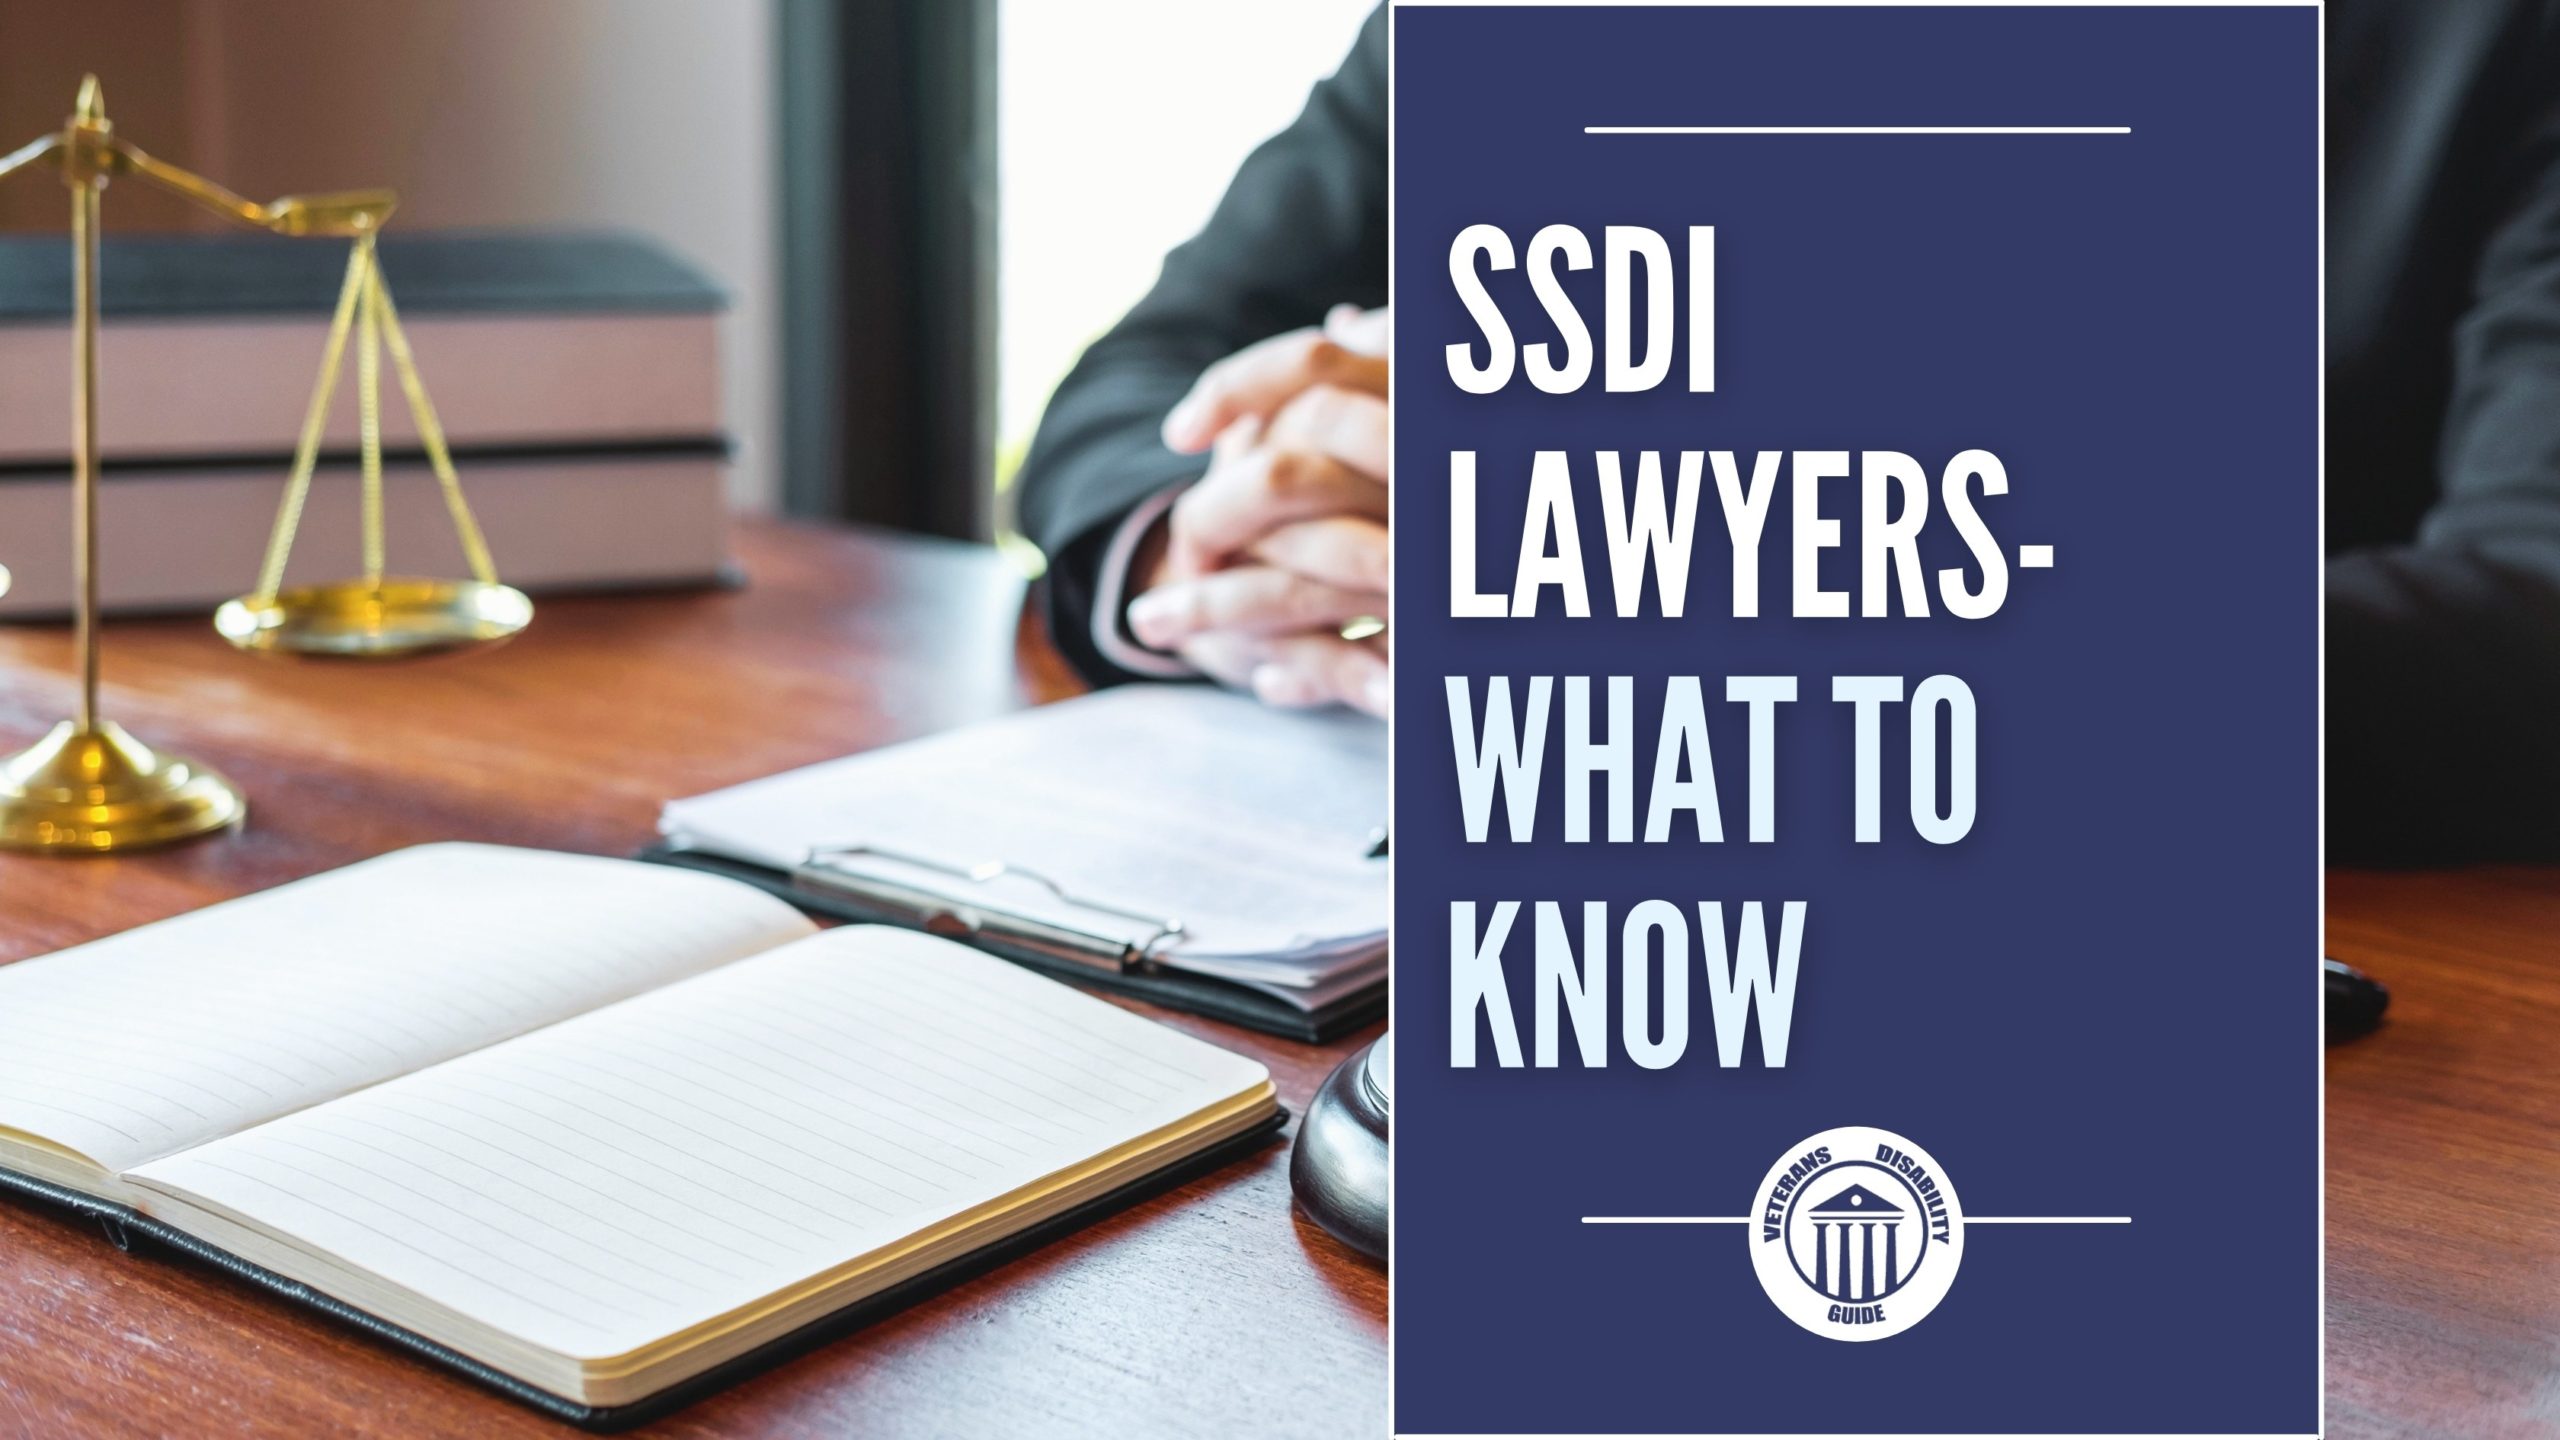 SSDI Lawyers What To Know blog header image